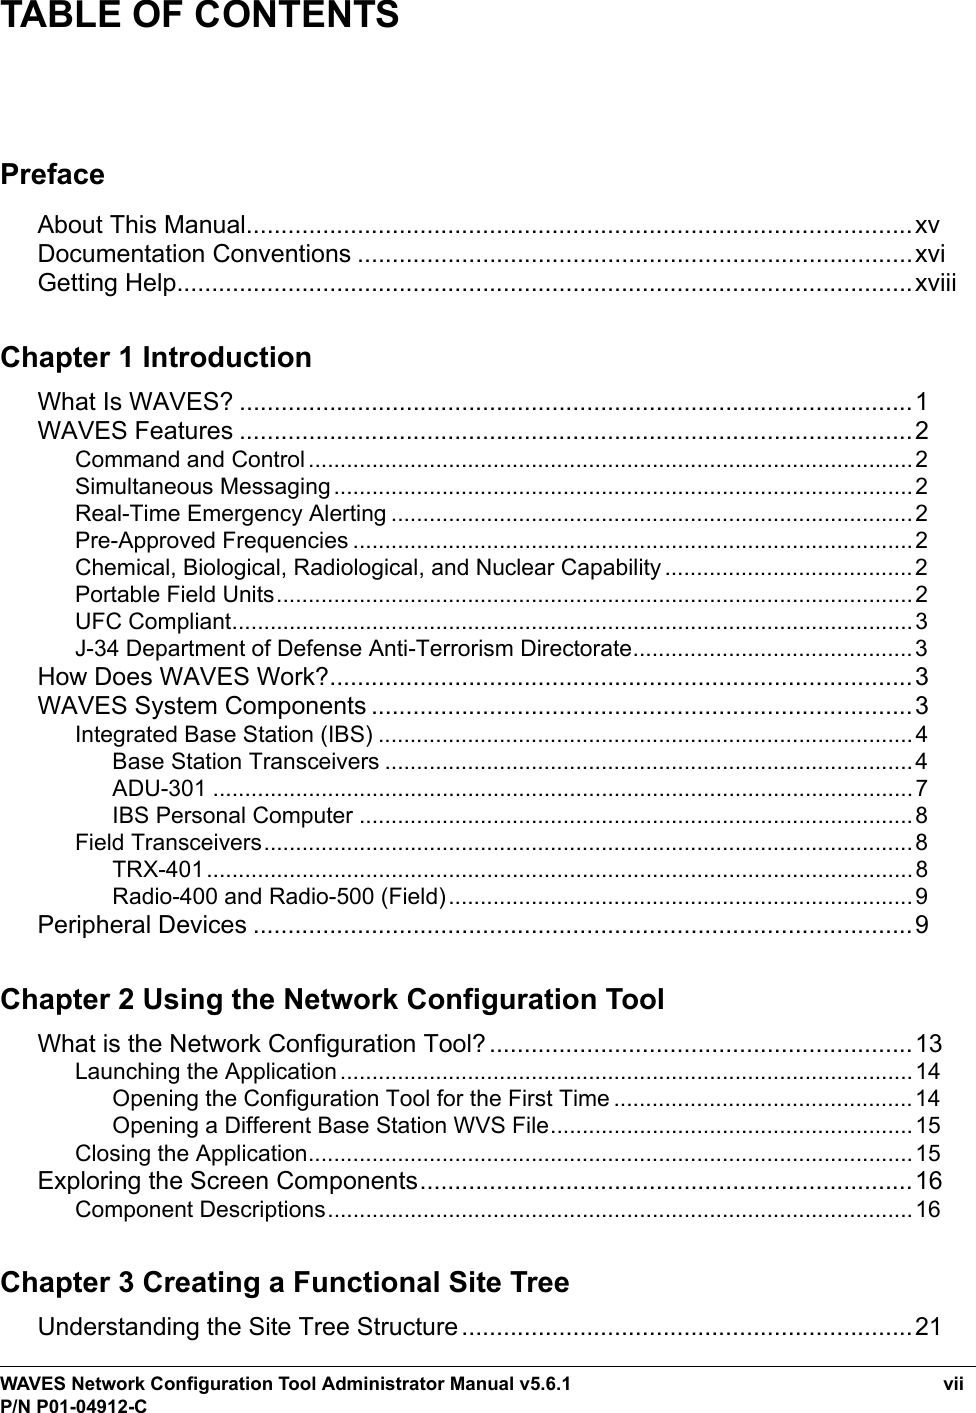 WAVES Network Configuration Tool Administrator Manual v5.6.1 viiP/N P01-04912-CTABLE OF CONTENTSPrefaceAbout This Manual................................................................................................xvDocumentation Conventions ................................................................................xviGetting Help..........................................................................................................xviiiChapter 1 IntroductionWhat Is WAVES? .................................................................................................1WAVES Features .................................................................................................2Command and Control...............................................................................................2Simultaneous Messaging...........................................................................................2Real-Time Emergency Alerting ..................................................................................2Pre-Approved Frequencies ........................................................................................2Chemical, Biological, Radiological, and Nuclear Capability .......................................2Portable Field Units....................................................................................................2UFC Compliant...........................................................................................................3J-34 Department of Defense Anti-Terrorism Directorate............................................3How Does WAVES Work?....................................................................................3WAVES System Components ..............................................................................3Integrated Base Station (IBS) ....................................................................................4Base Station Transceivers ...................................................................................4ADU-301 ..............................................................................................................7IBS Personal Computer .......................................................................................8Field Transceivers......................................................................................................8TRX-401...............................................................................................................8Radio-400 and Radio-500 (Field).........................................................................9Peripheral Devices ...............................................................................................9Chapter 2 Using the Network Configuration ToolWhat is the Network Configuration Tool?.............................................................13Launching the Application.......................................................................................... 14Opening the Configuration Tool for the First Time ...............................................14Opening a Different Base Station WVS File.........................................................15Closing the Application............................................................................................... 15Exploring the Screen Components.......................................................................16Component Descriptions............................................................................................ 16Chapter 3 Creating a Functional Site TreeUnderstanding the Site Tree Structure .................................................................21